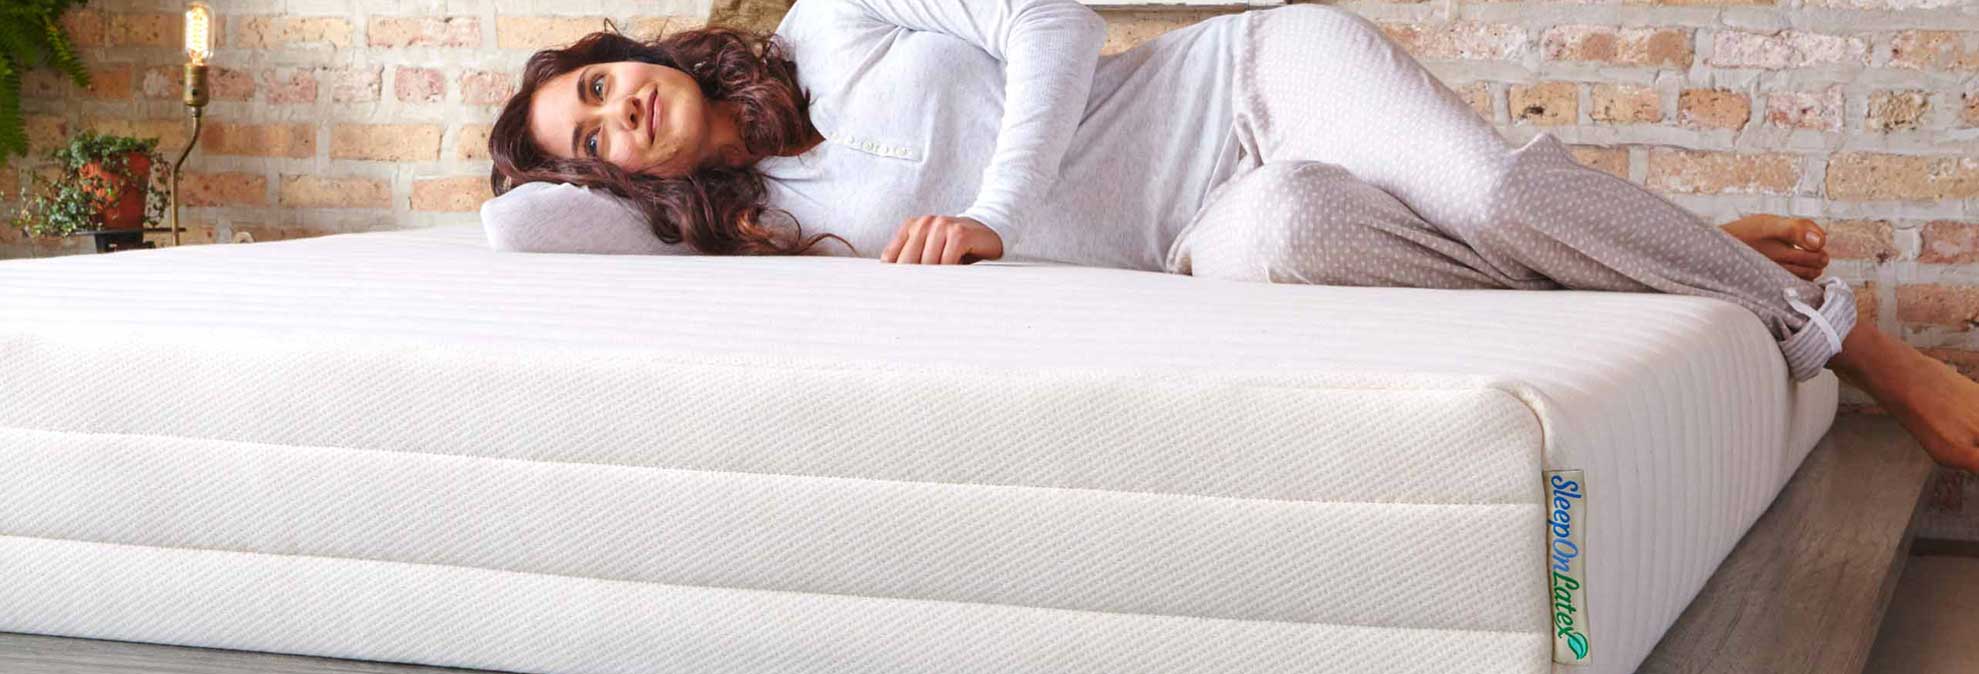 Best Mattress for Your Size and Sleep Style Consumer Reports